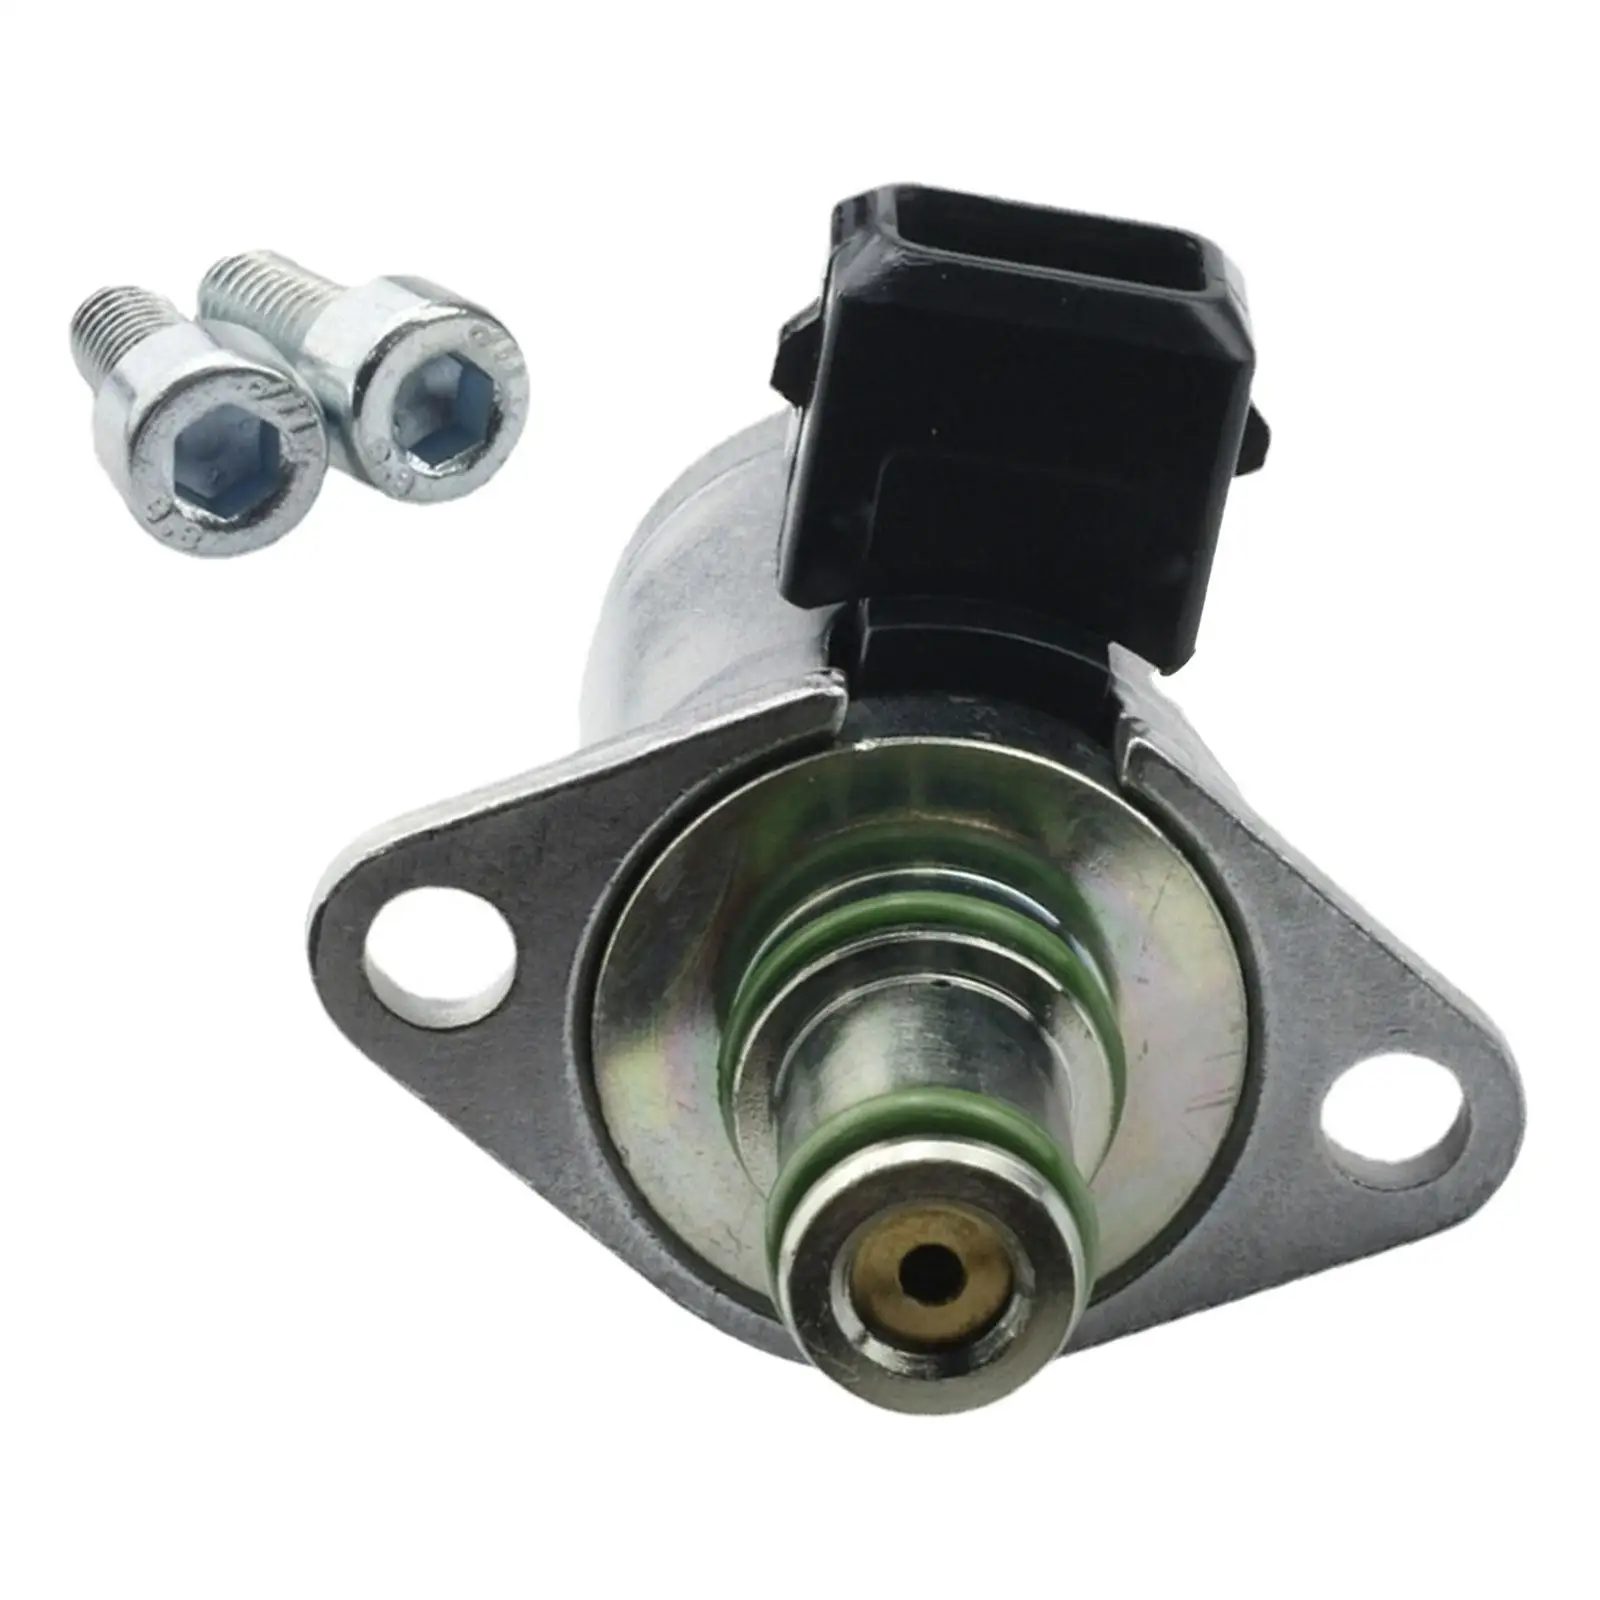 Power Speed Related Steering Proportioning Valve Replaces Durable High